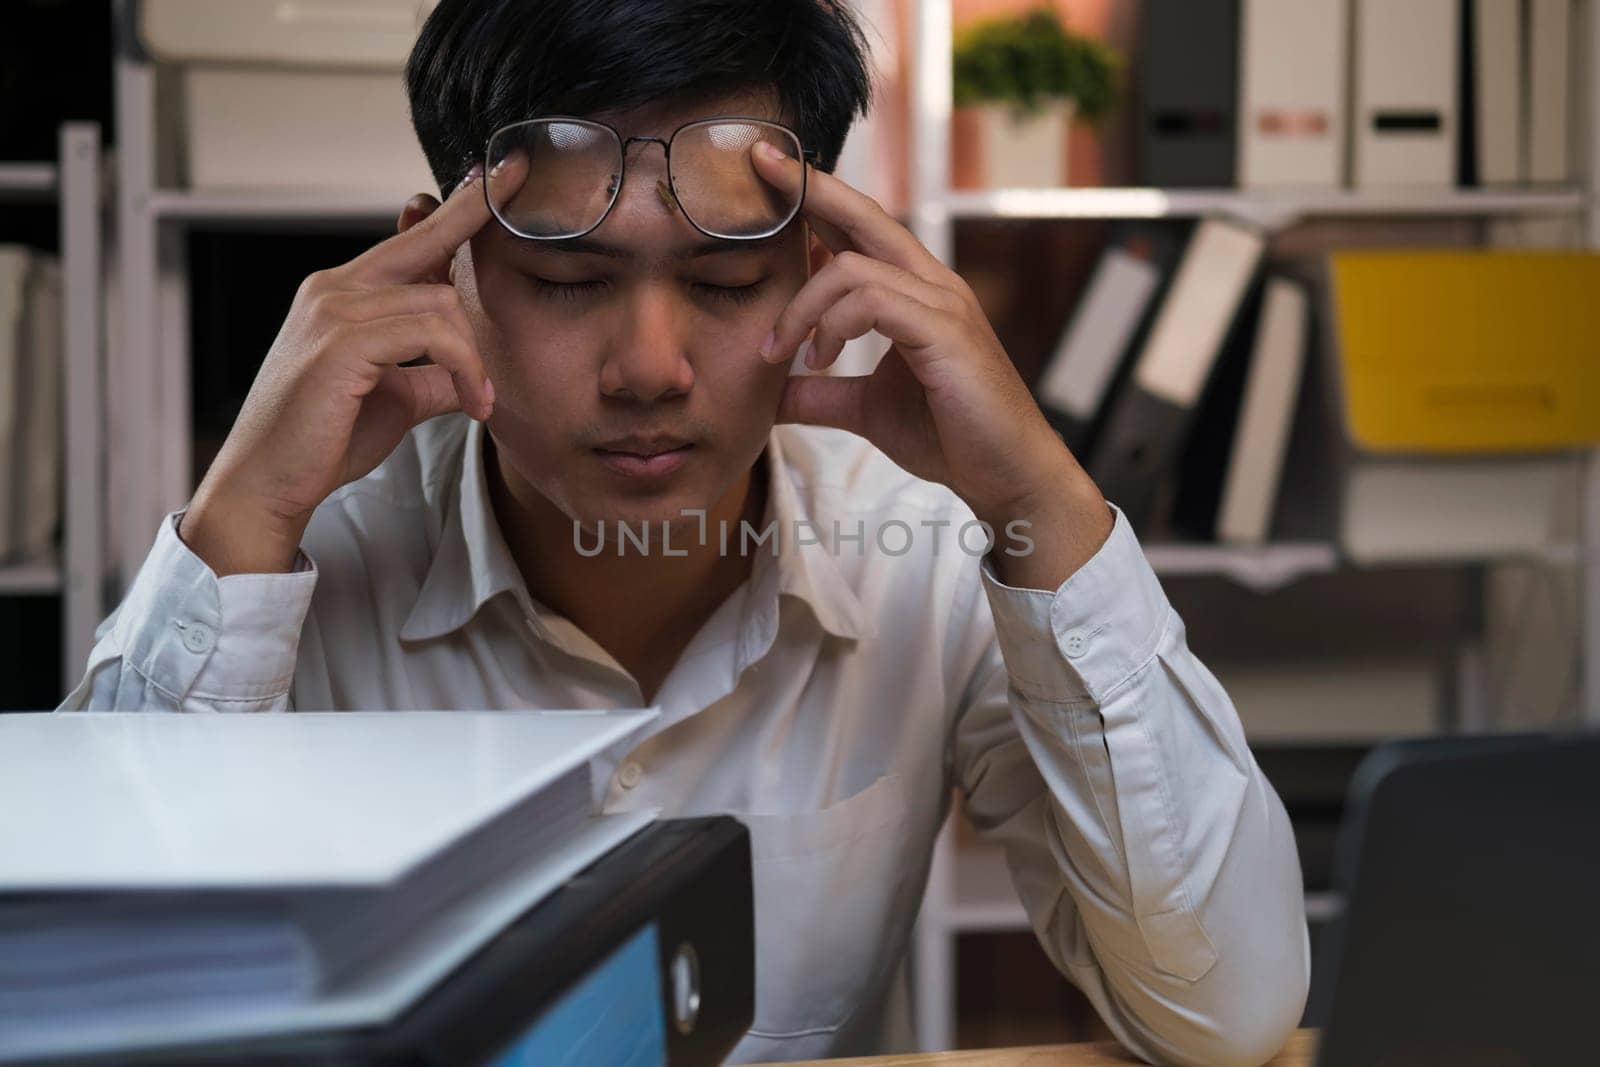 Exhausted young man with laptop in office working late sitting on desk in office overtime at night. Frustrated young businessman massaging his nose and keeping eyes closed while sitting at his working place in office.